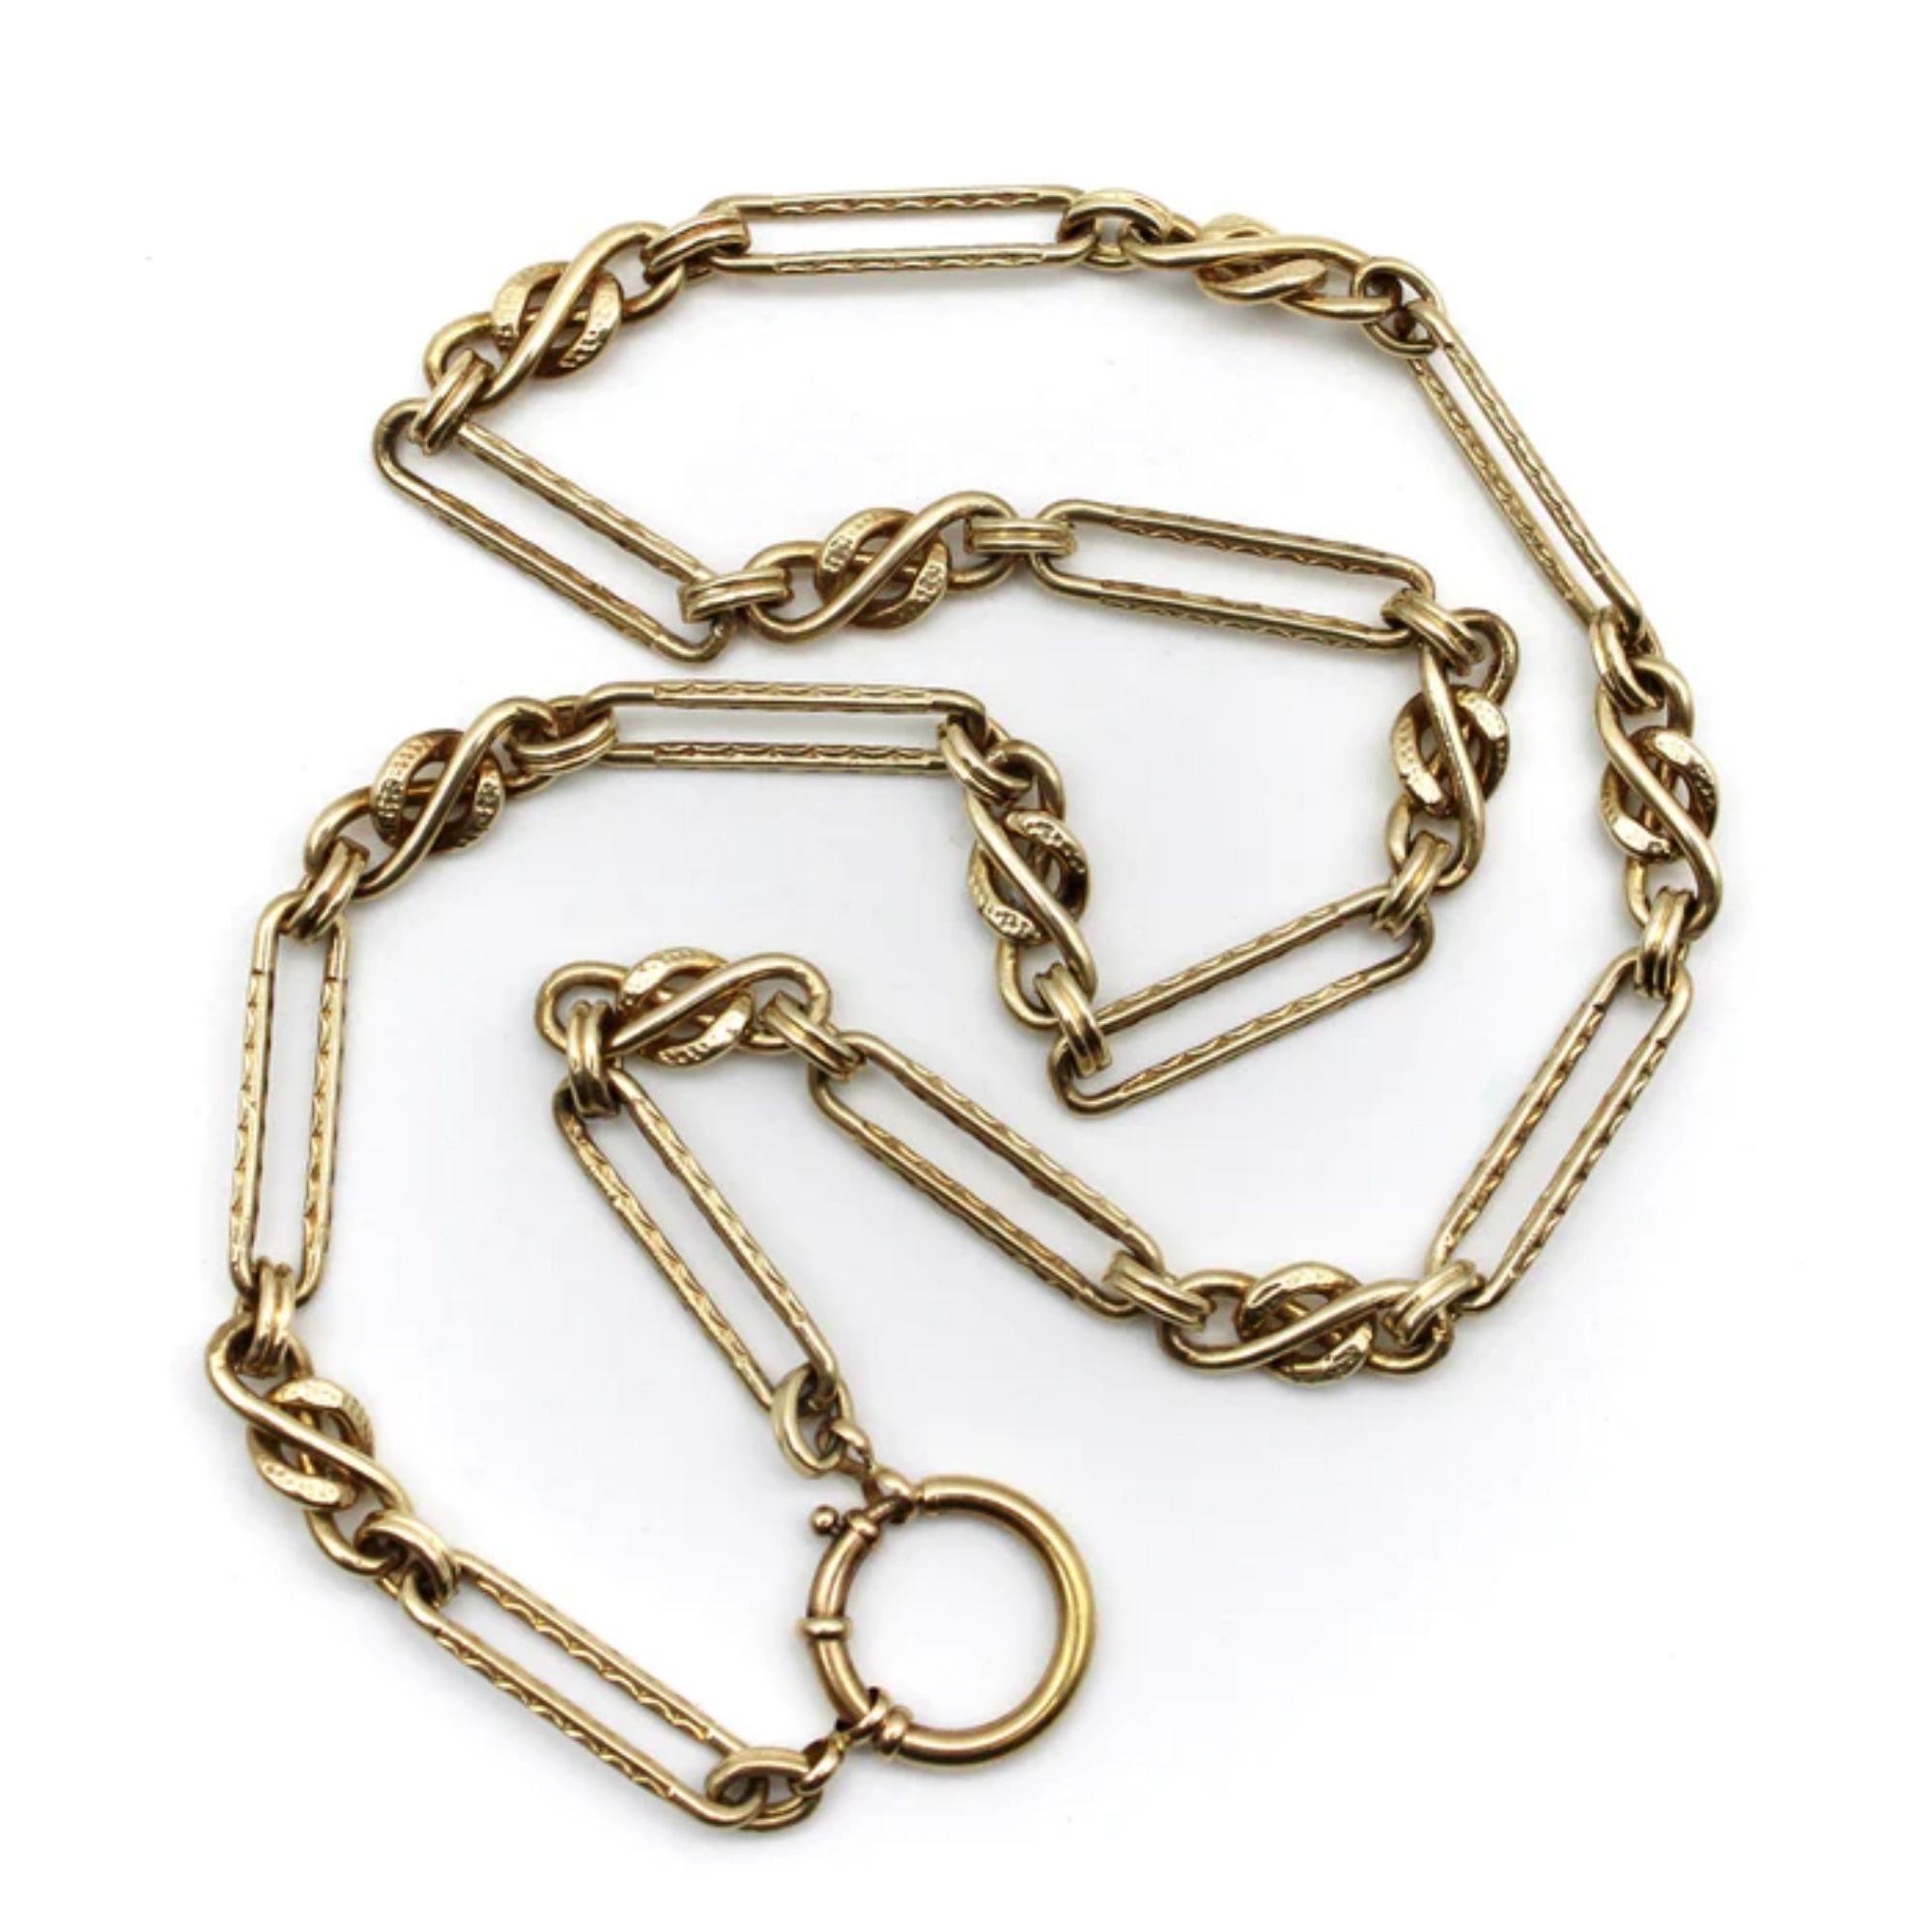 When we came across a fabulous Victorian era watch chain in silver, we fell in love with it—and knew we needed to make a version of the necklace in gold! We made molds from the original links, and then created a 14k gold chain almost identical to